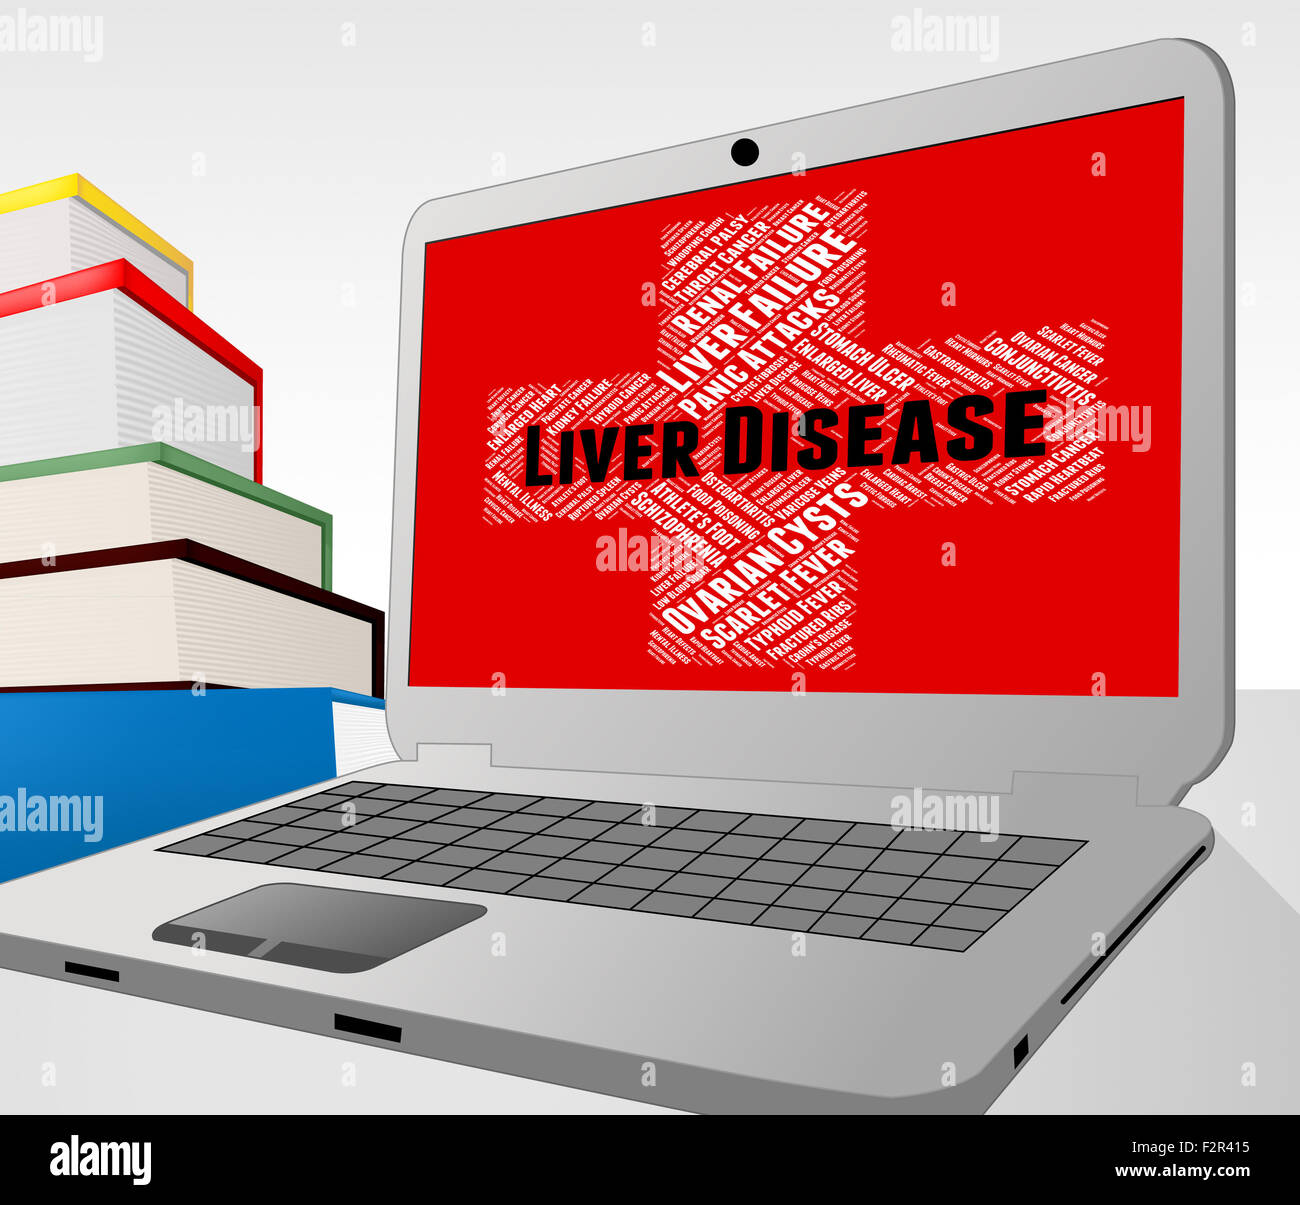 Liver Disease Representing Poor Health And Infections Stock Photo